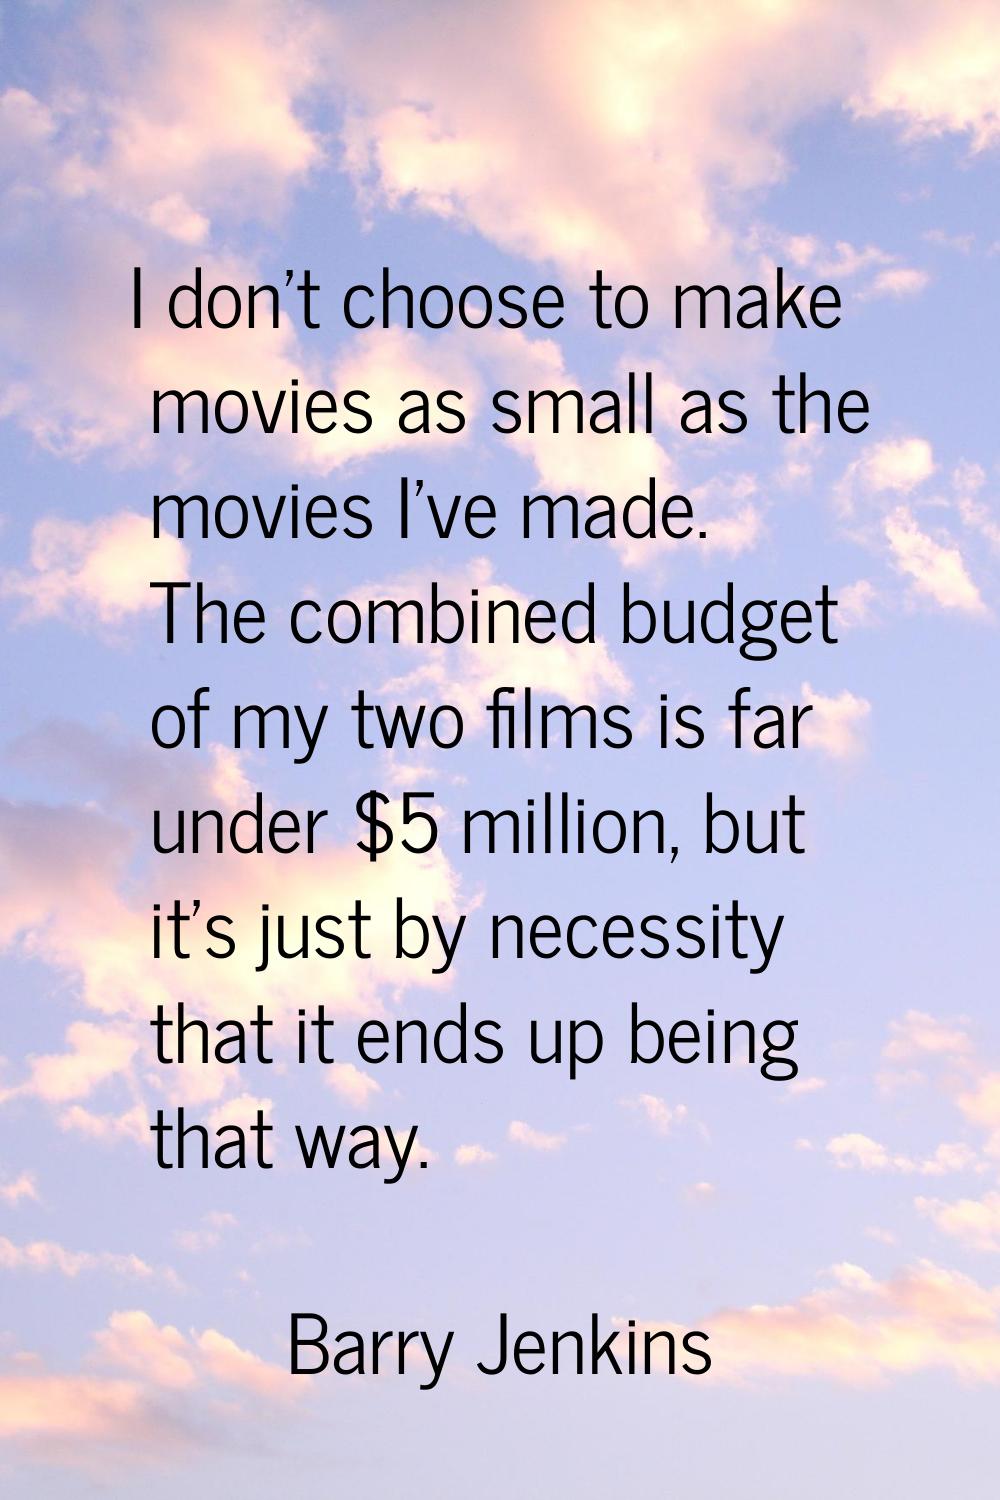 I don't choose to make movies as small as the movies I've made. The combined budget of my two films